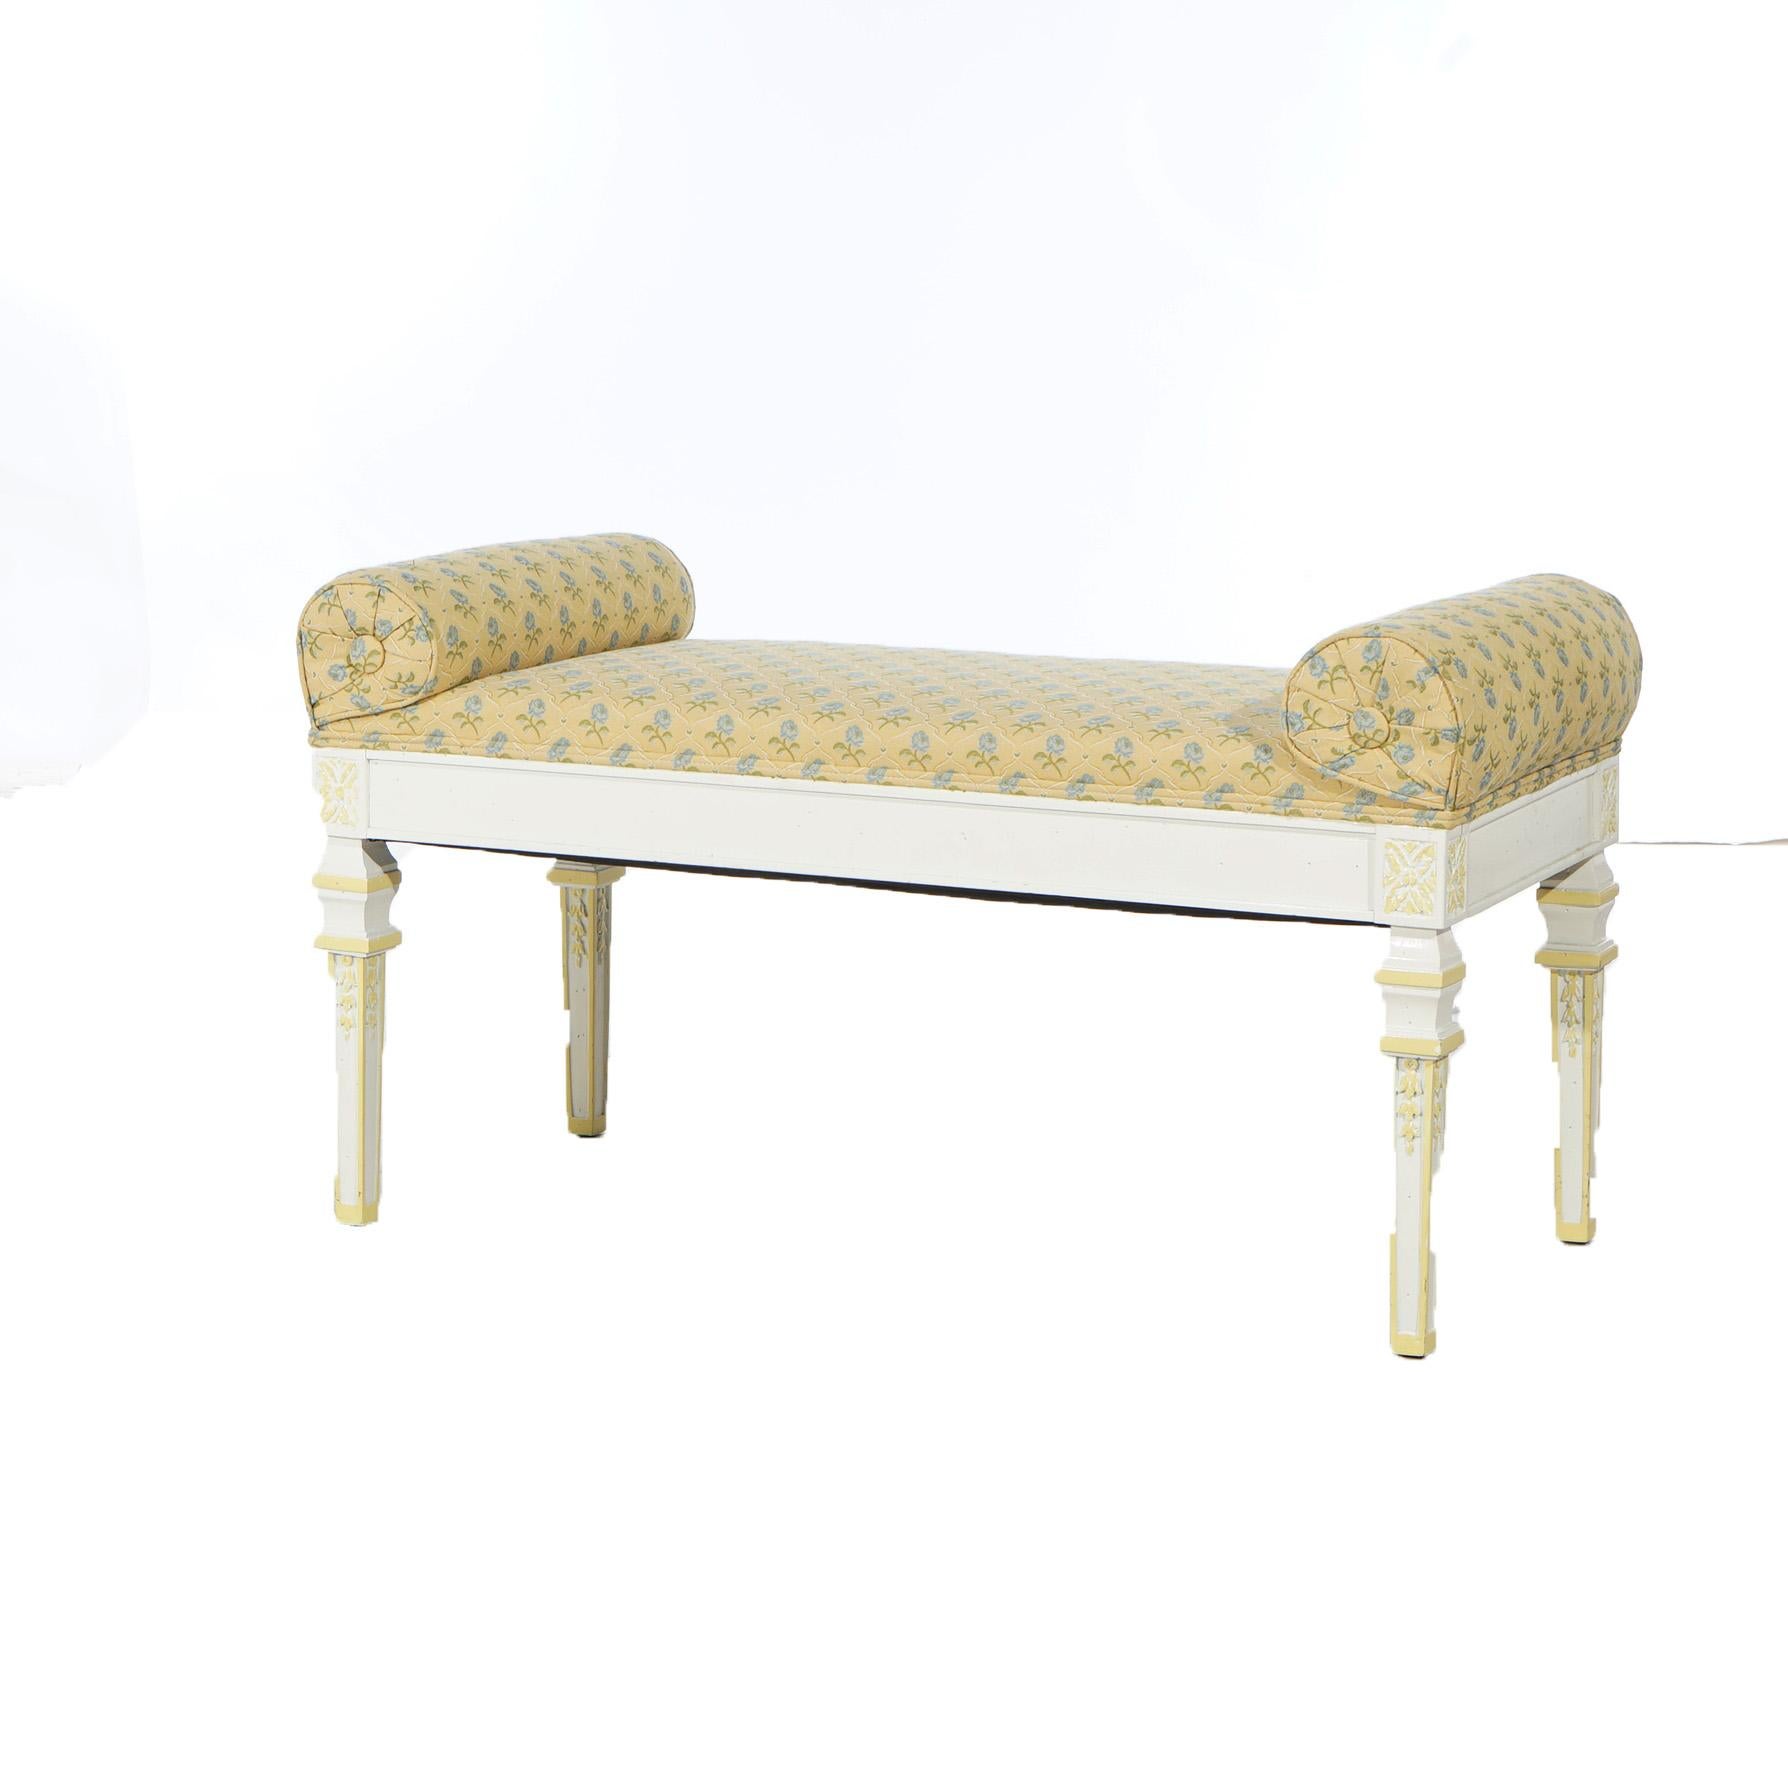 ***Ask About Reduced In-House Shipping Rates - Reliable Service & Fully Insured***
A French Louis XVI style vanity bench offers upholstered cushion with scroll form sides over painted wood frame with rosettes and inverted bellflowers, raised on